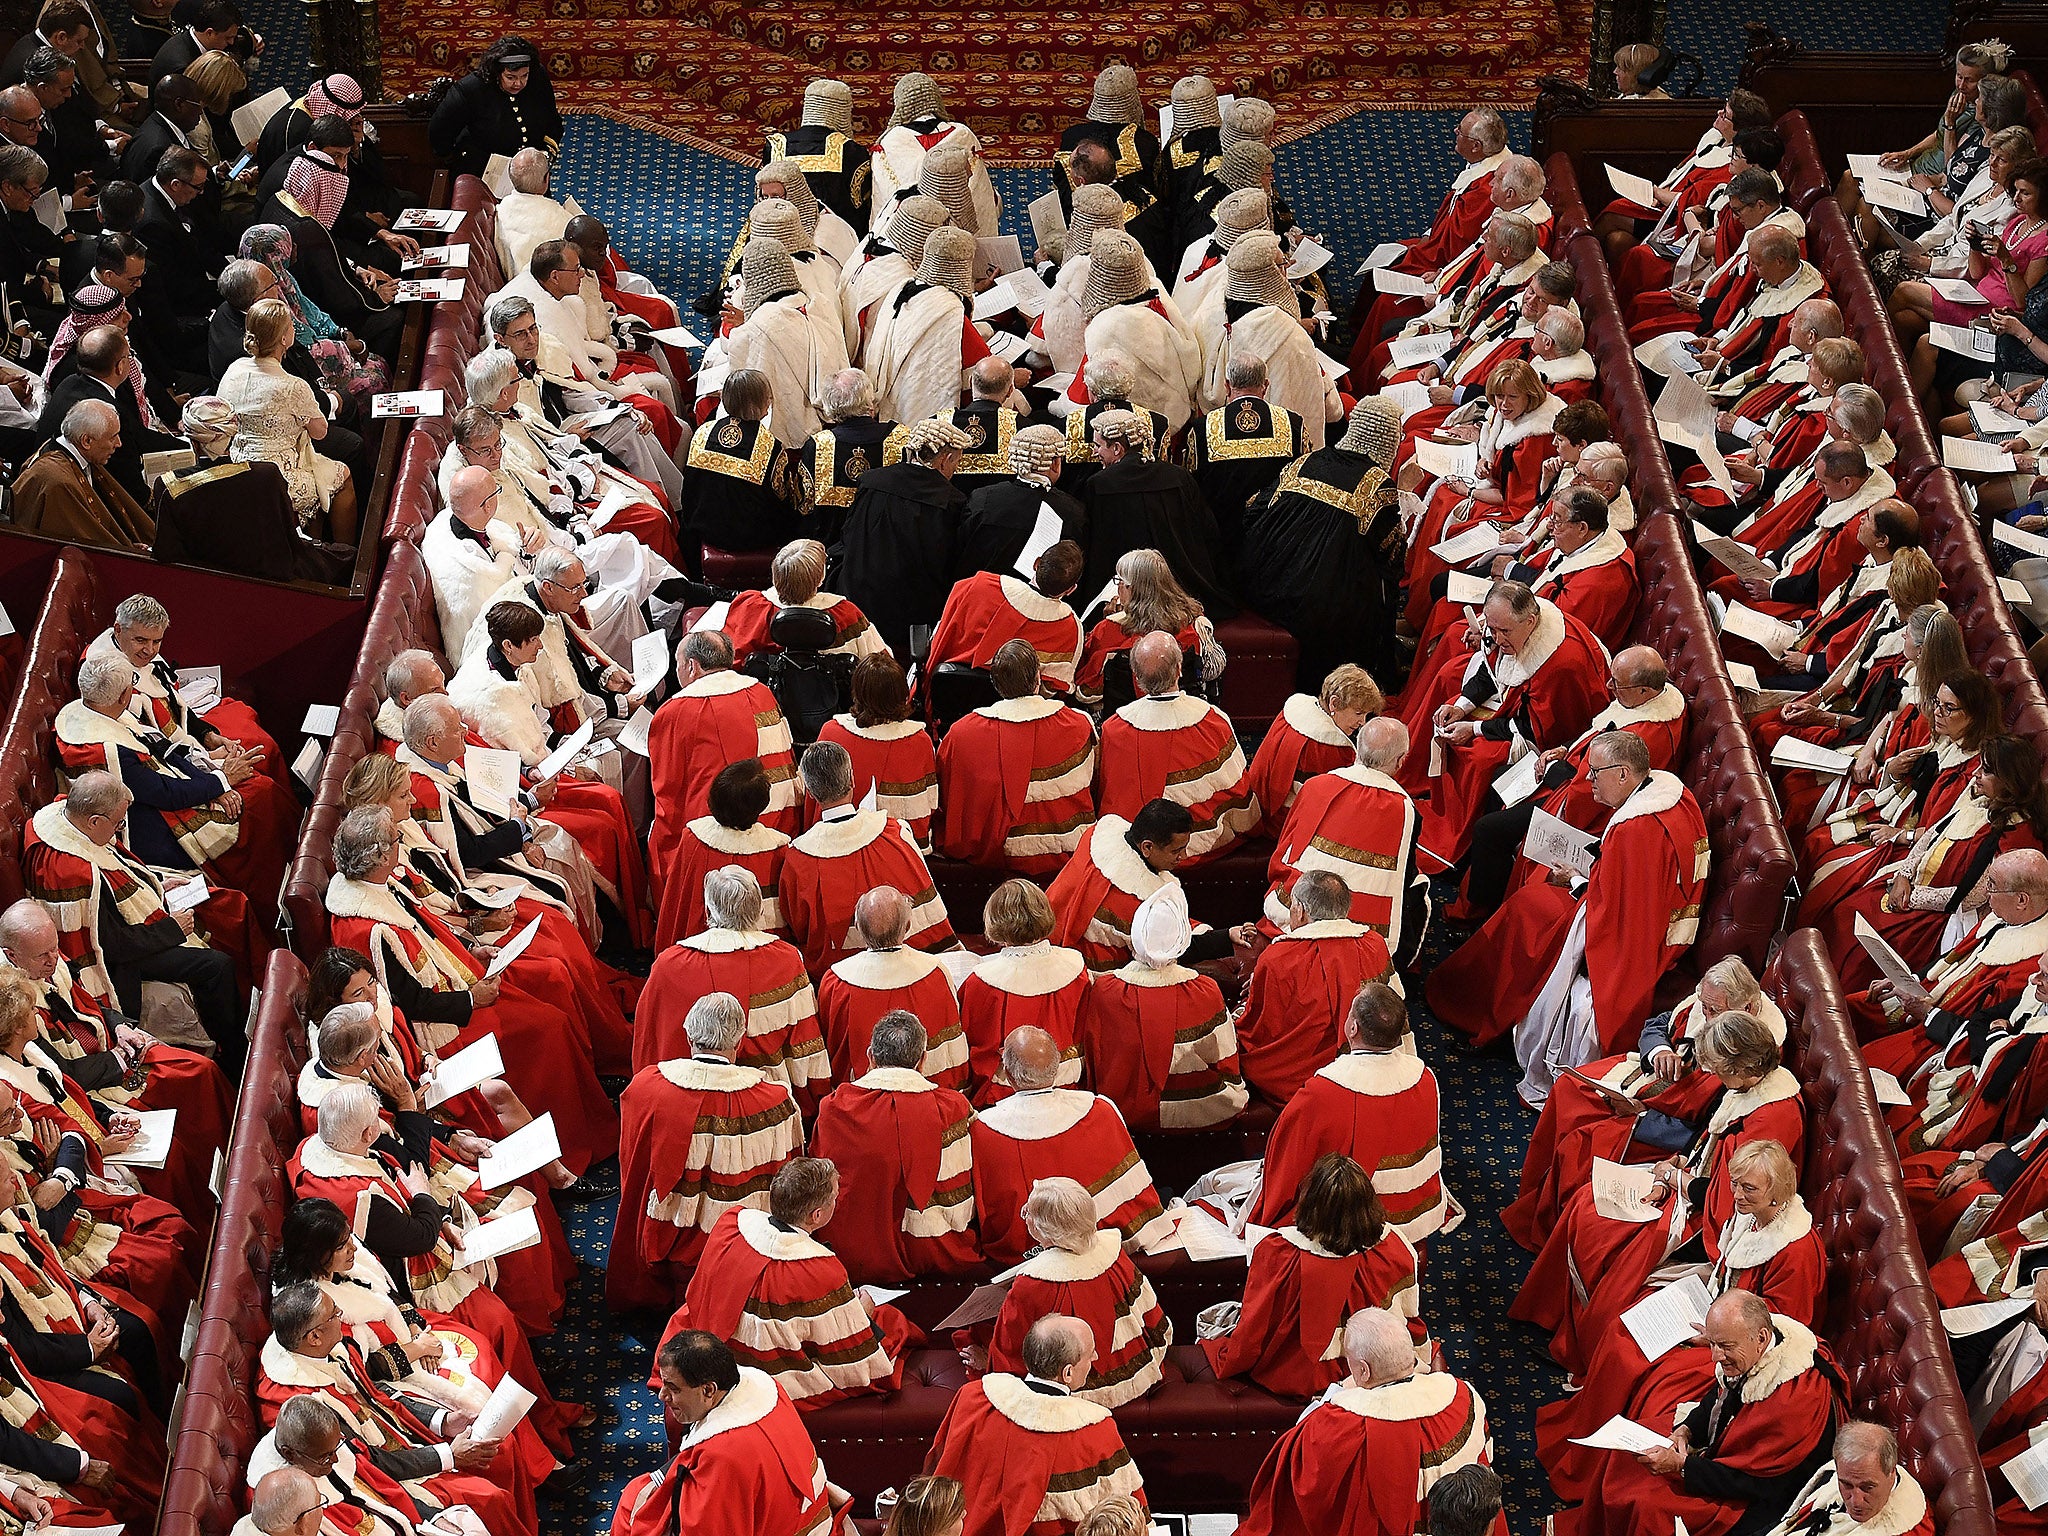 An analysis by the Electoral Reform Society found that nearly half of the 798 peers made 10 contributions or fewer in 2016-17